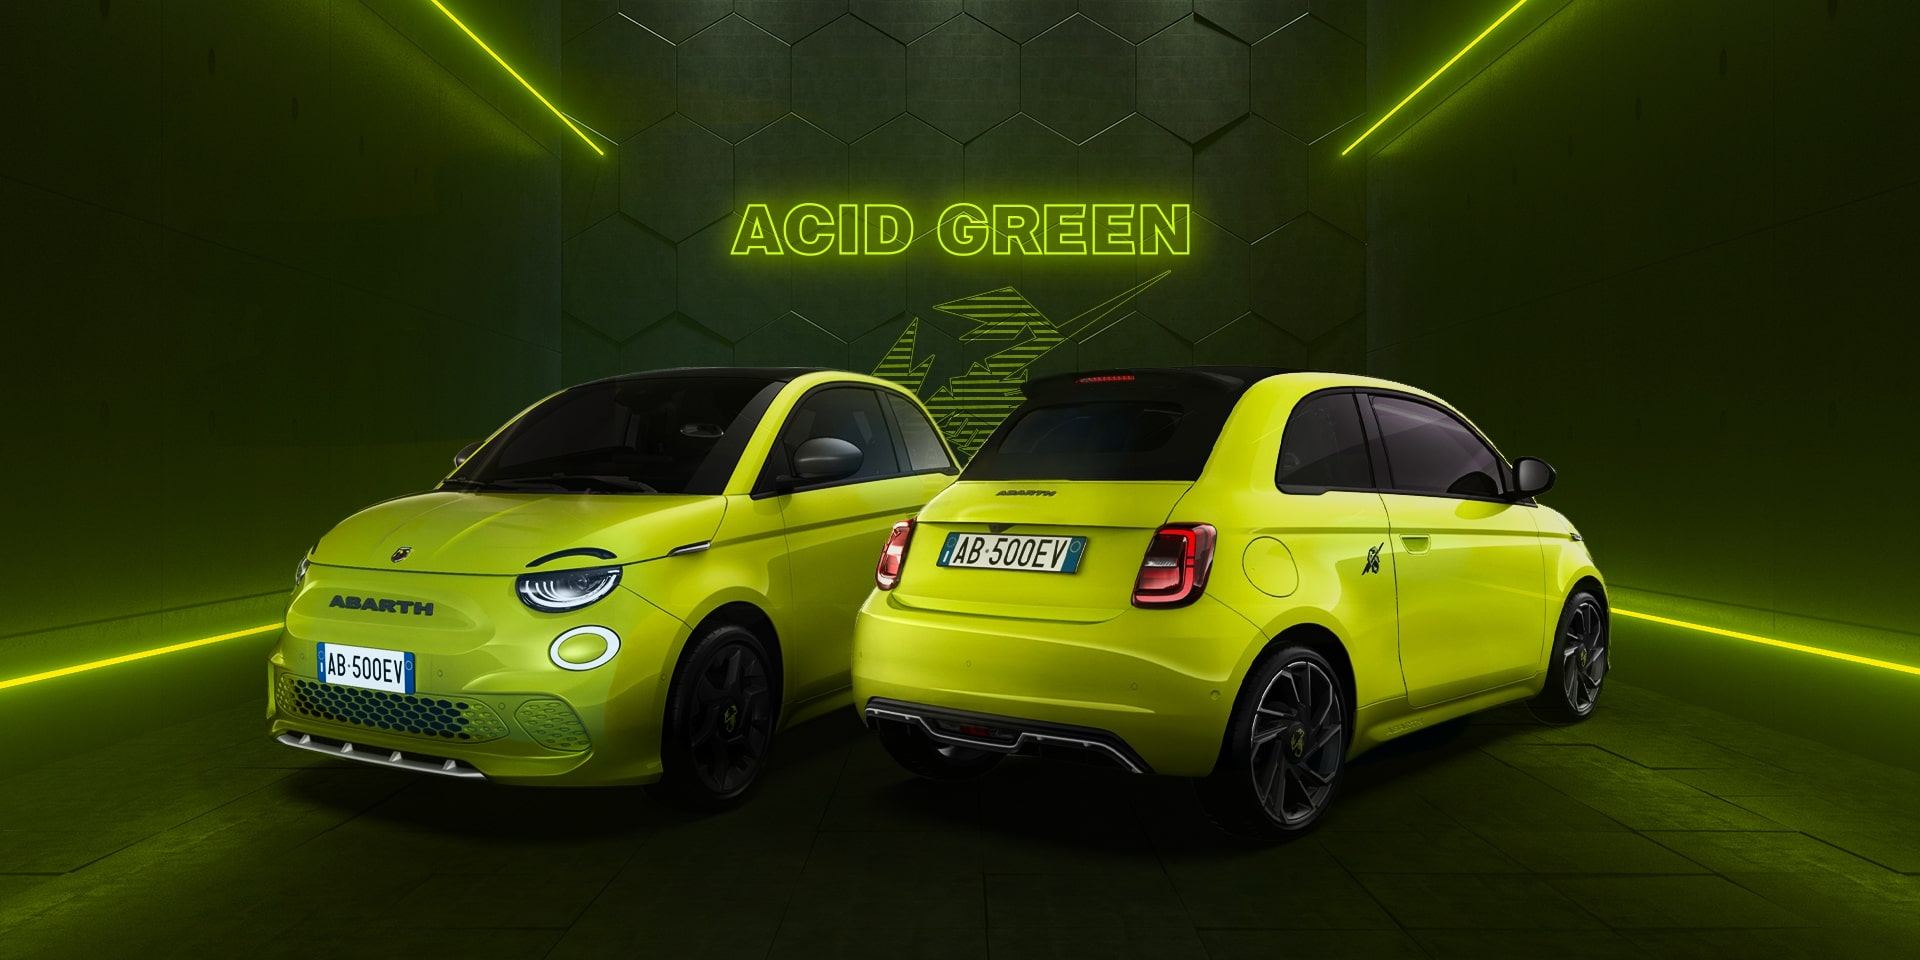 New Abarth Electric 500e – The New Era of Electric